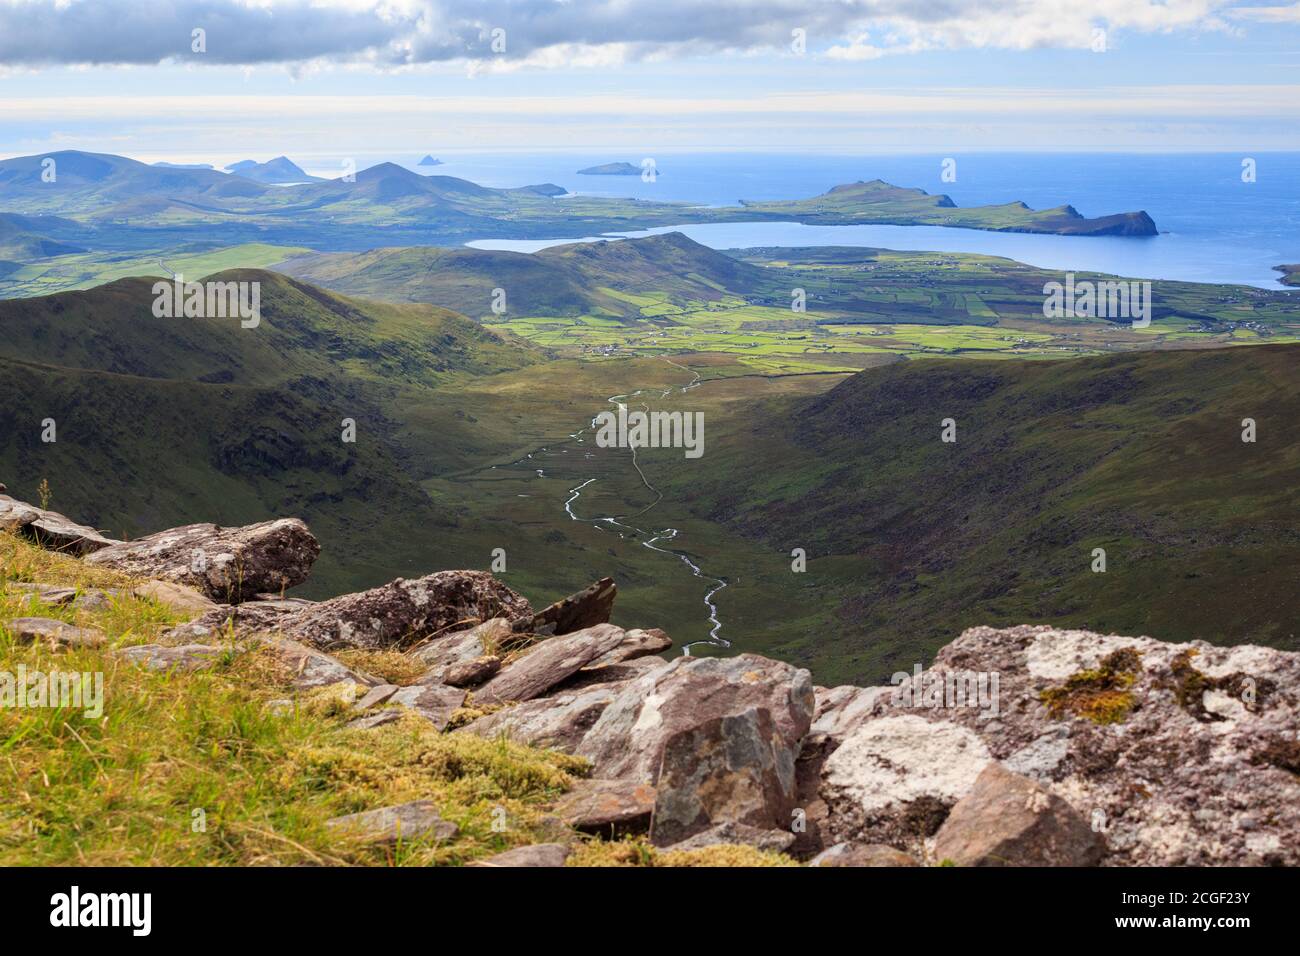 Looking West along the Feohanagh River valley towards Smerwick Harbour, Sybil Head and the Blasket Islands on the Dingle Peninsula in County Kerry, Ir Stock Photo